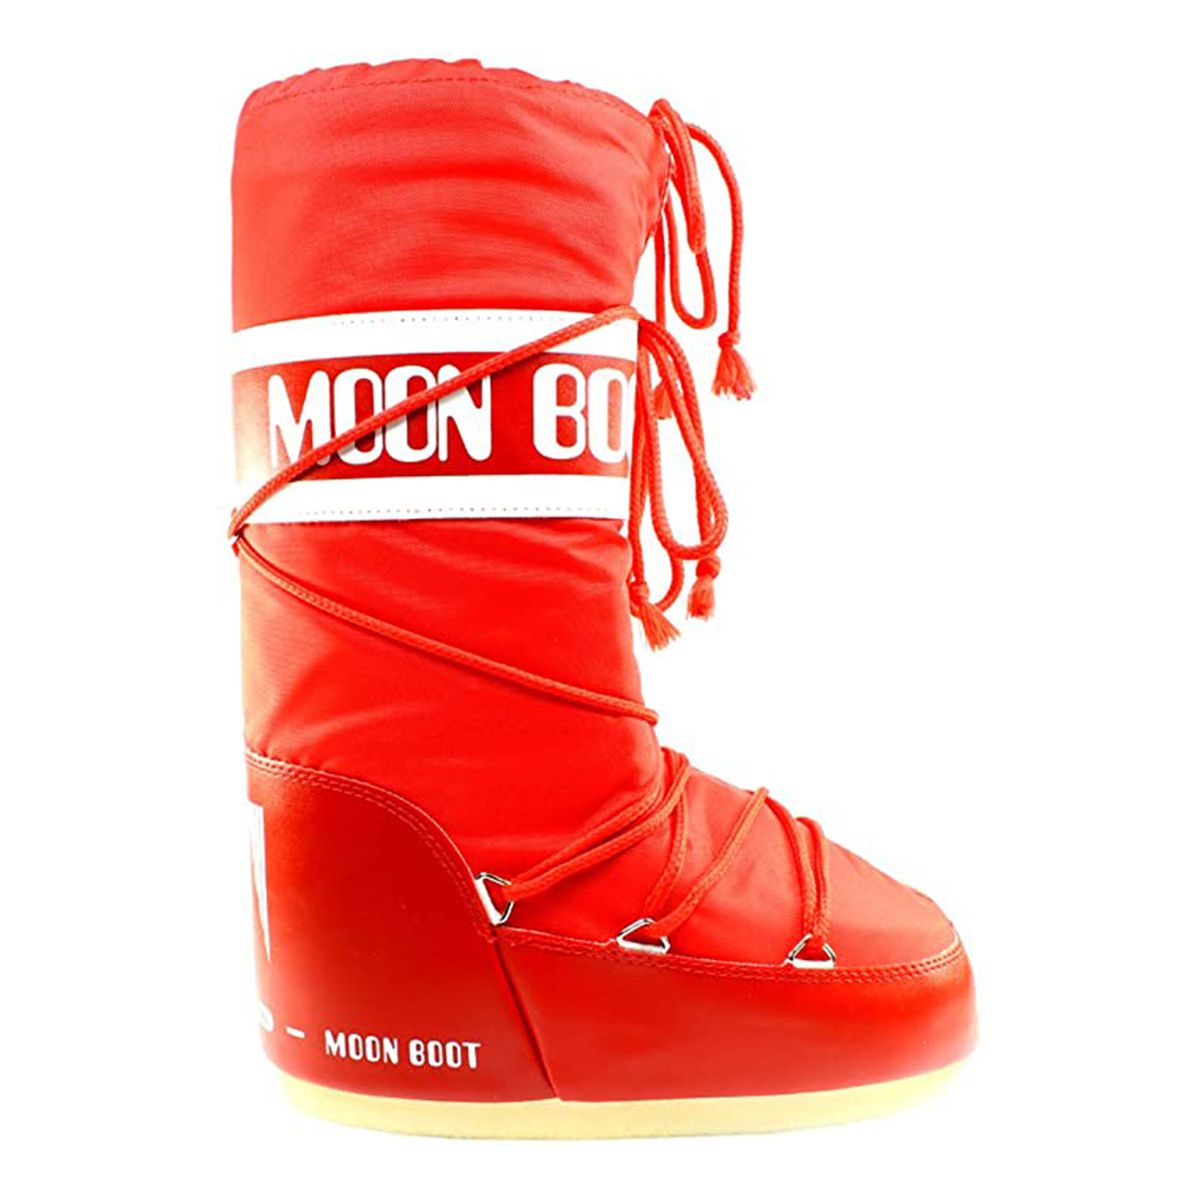 Moon boots trend